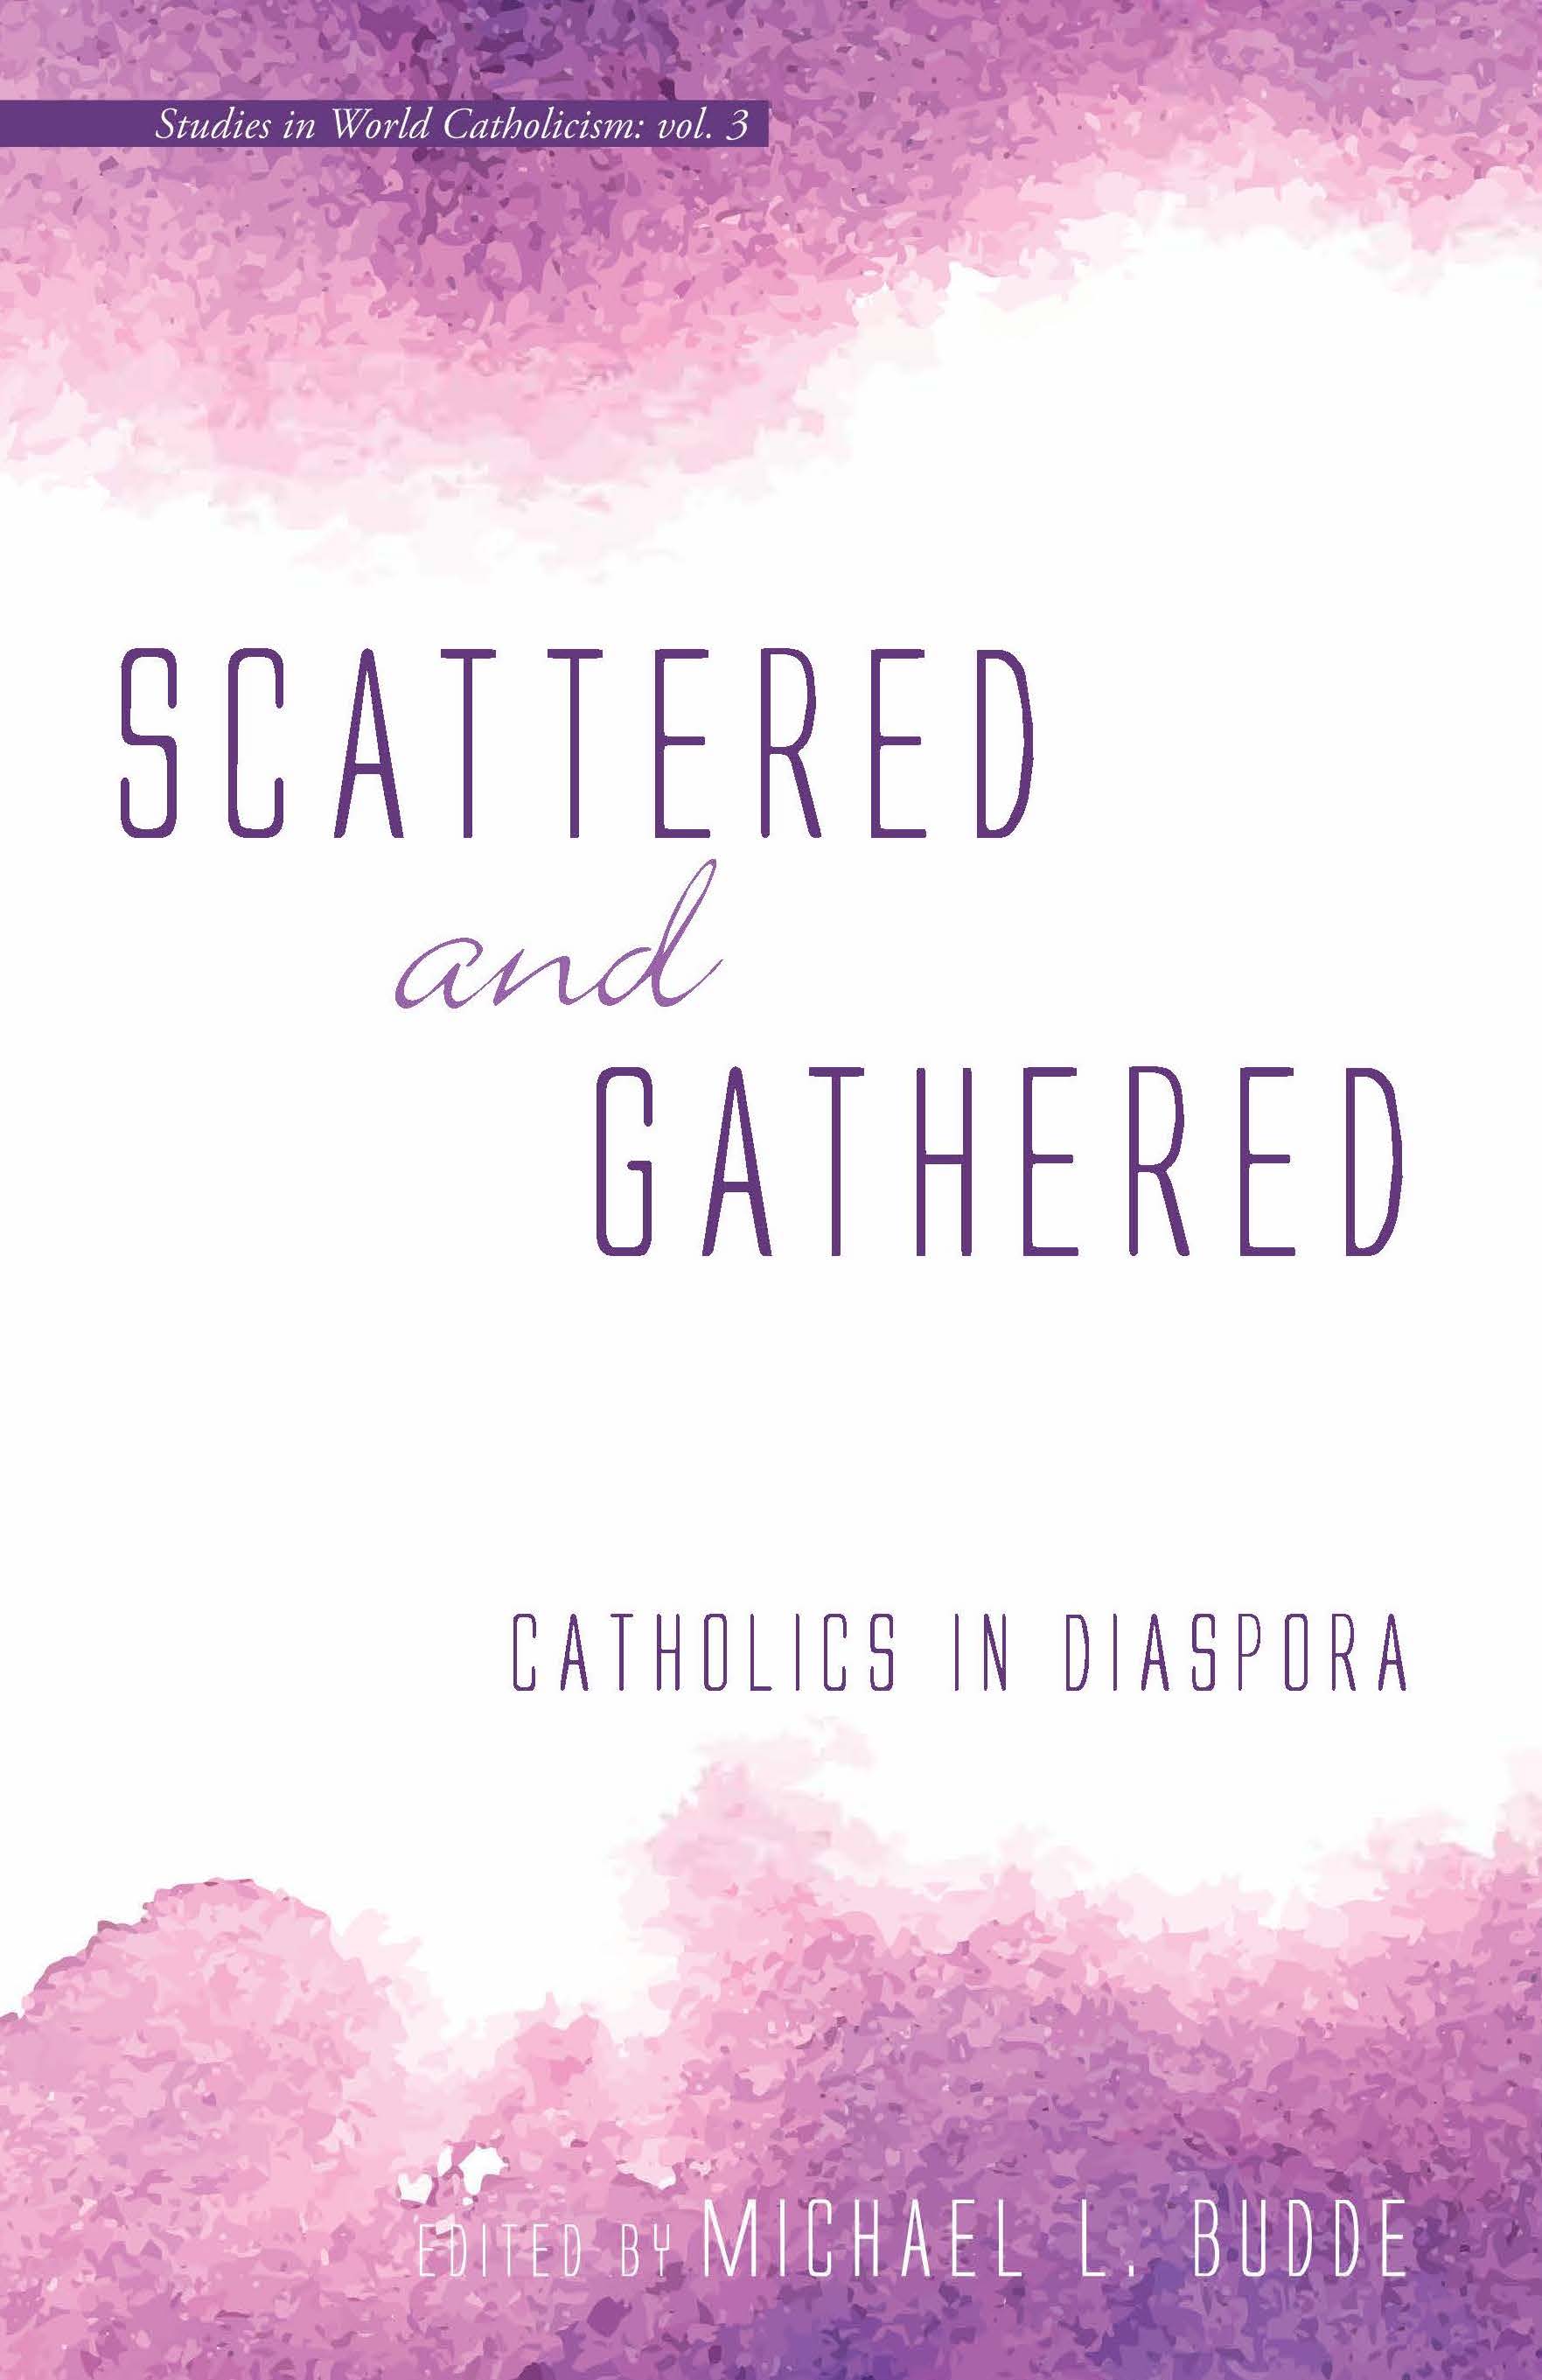 Vol. 3, Scattered & Gathered